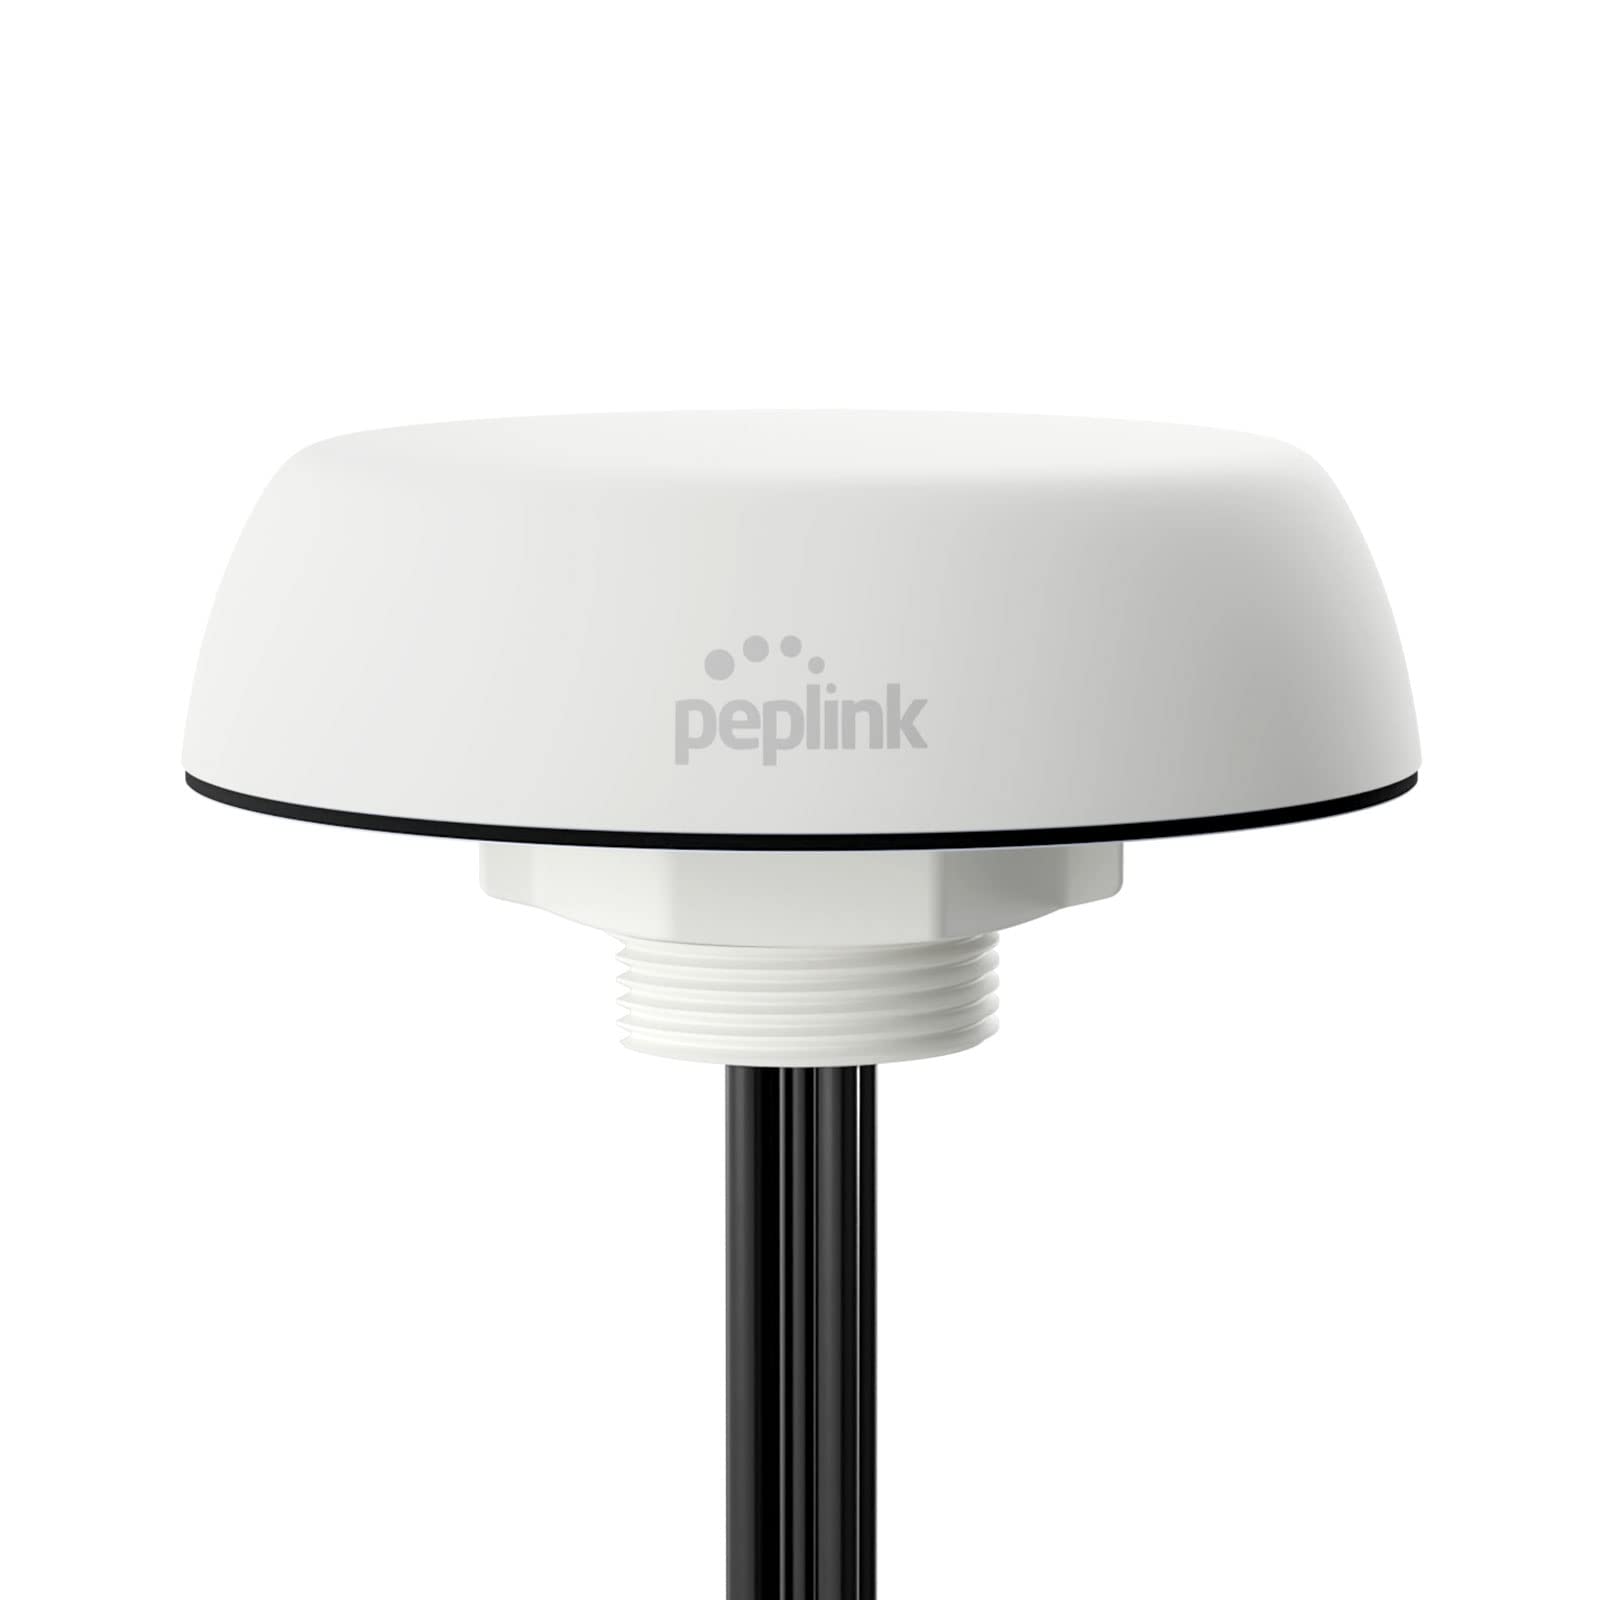 Peplink Mobility 22G, 5 in 1 Cellular and Wi-Fi Antenna System with GPS Receiver, QMA, 1ft/0.3m, White | ANT-MB-22G-Q-W-1